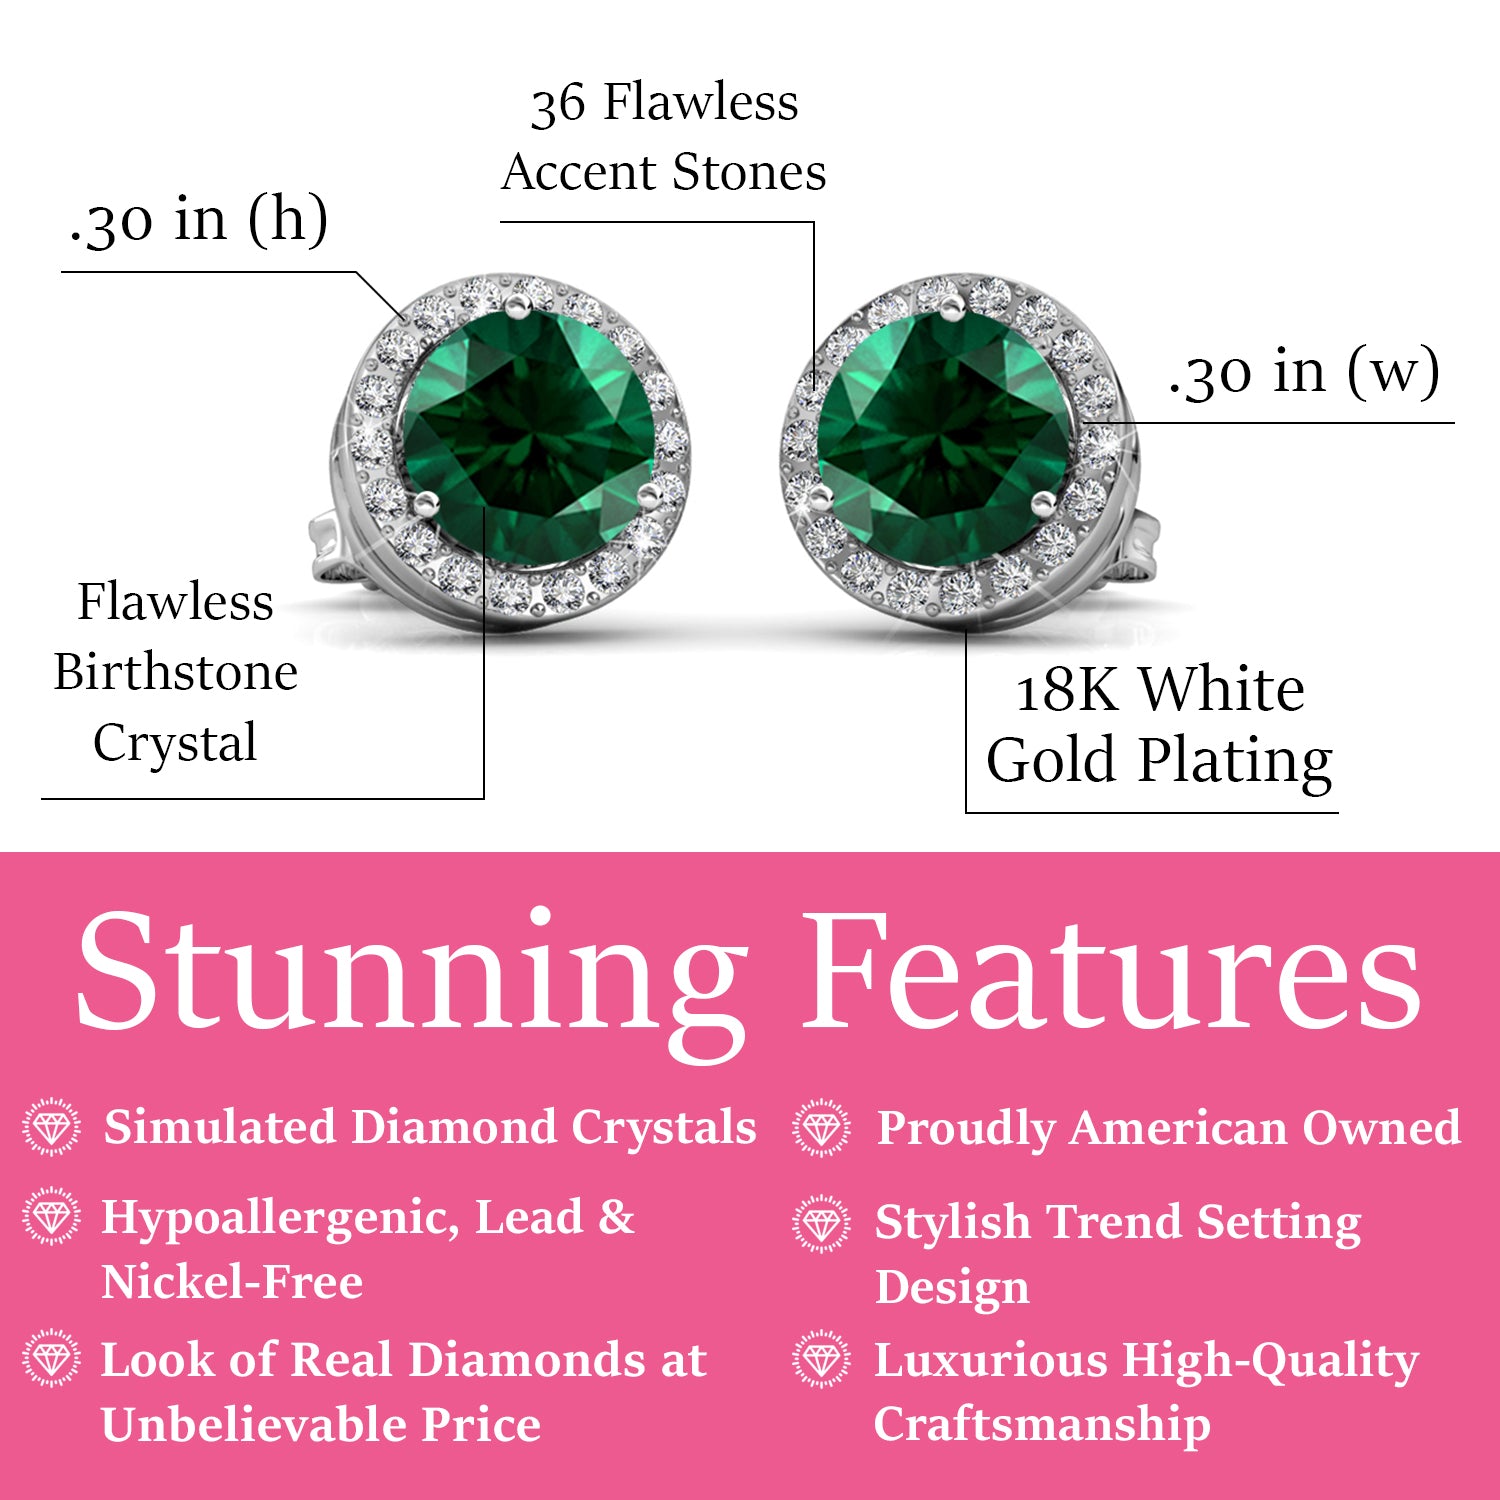 Royal May Birthstone Emerald Earrings, 18k White Gold Plated Silver Halo Earrings with Round Cut Crystals